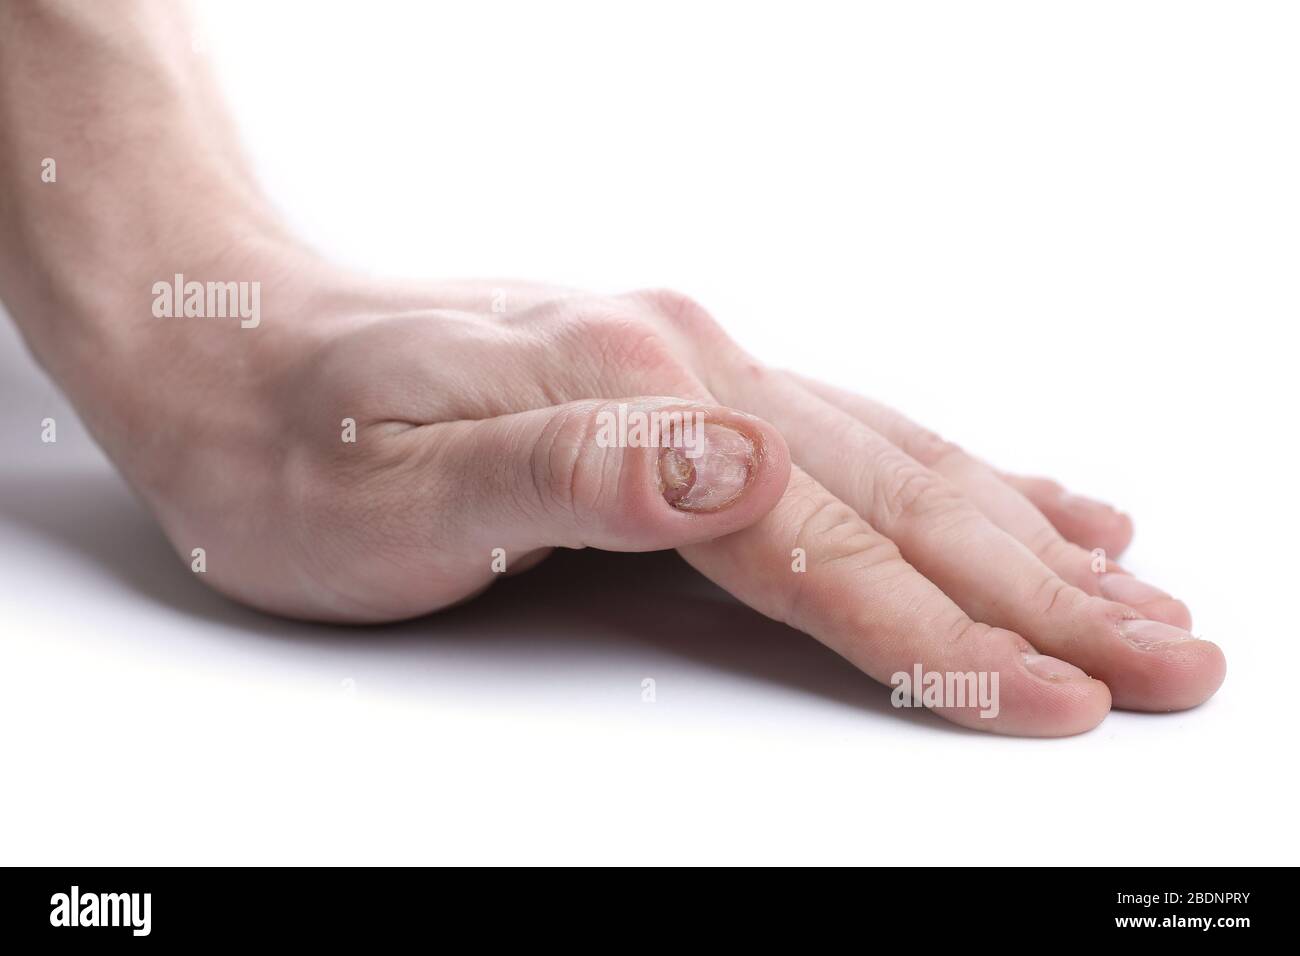 Fungal Nail Infection And Damage On Human Hand. Finger With Onychomycosis  Stock Photo, Picture and Royalty Free Image. Image 63647495.